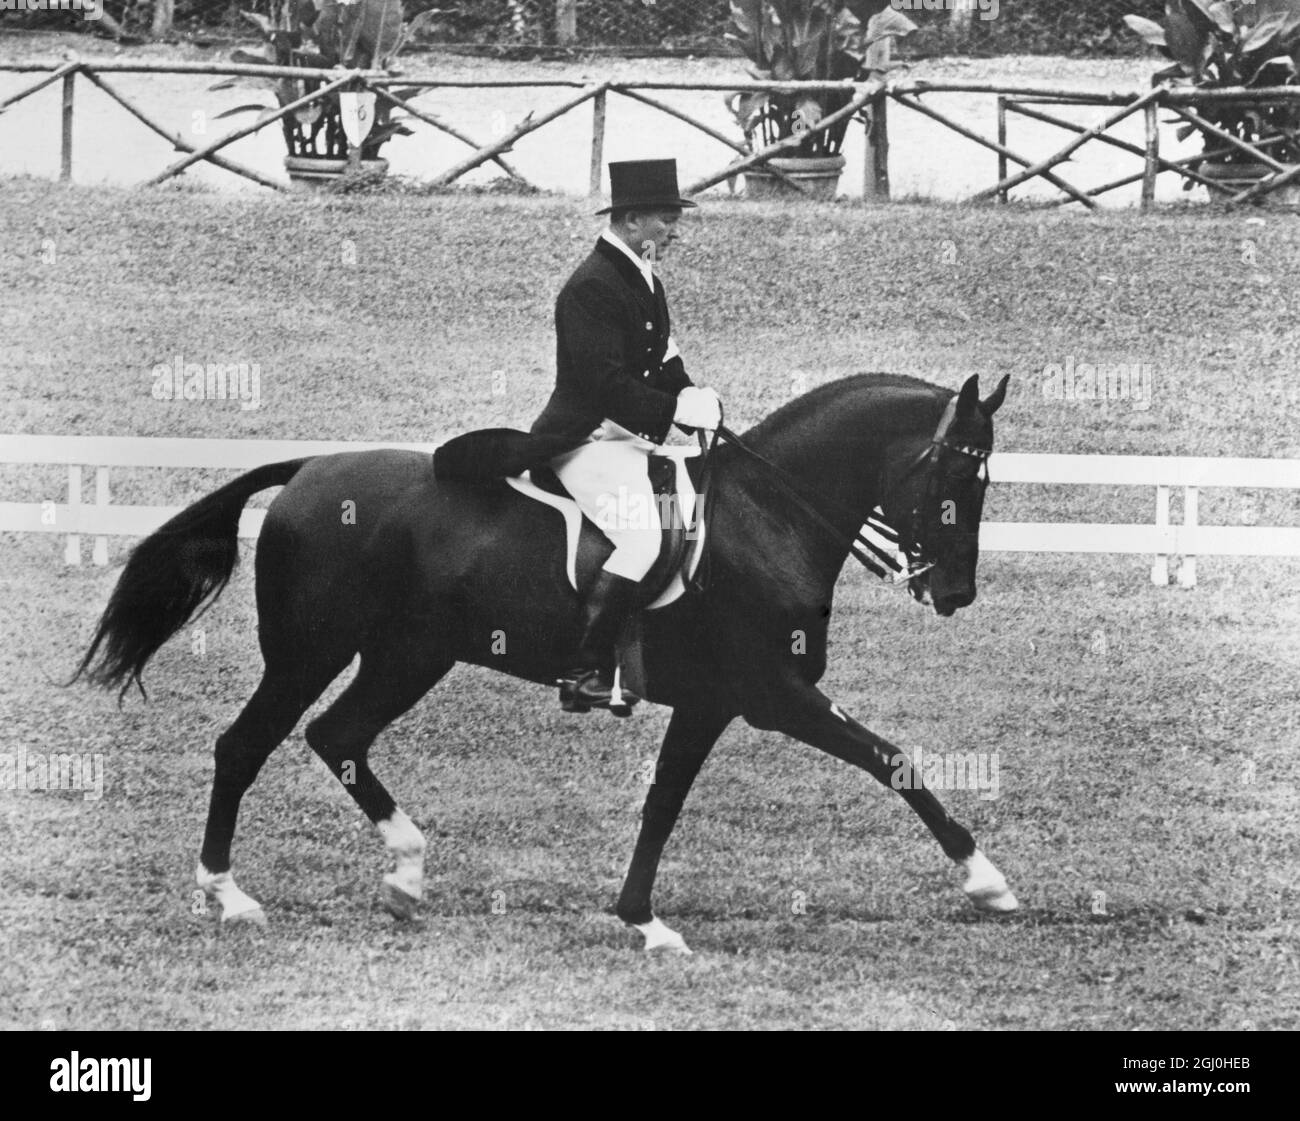 The Russian dressage ace Sergei Filatov on black stallion Absent. The start of the dressage event of the Olympic Games in Rome - 6th September 1960 - He came first and was the winner of the gold medal in the Olympic Grand Prix de Dressage. - ©TopFoto Stock Photo